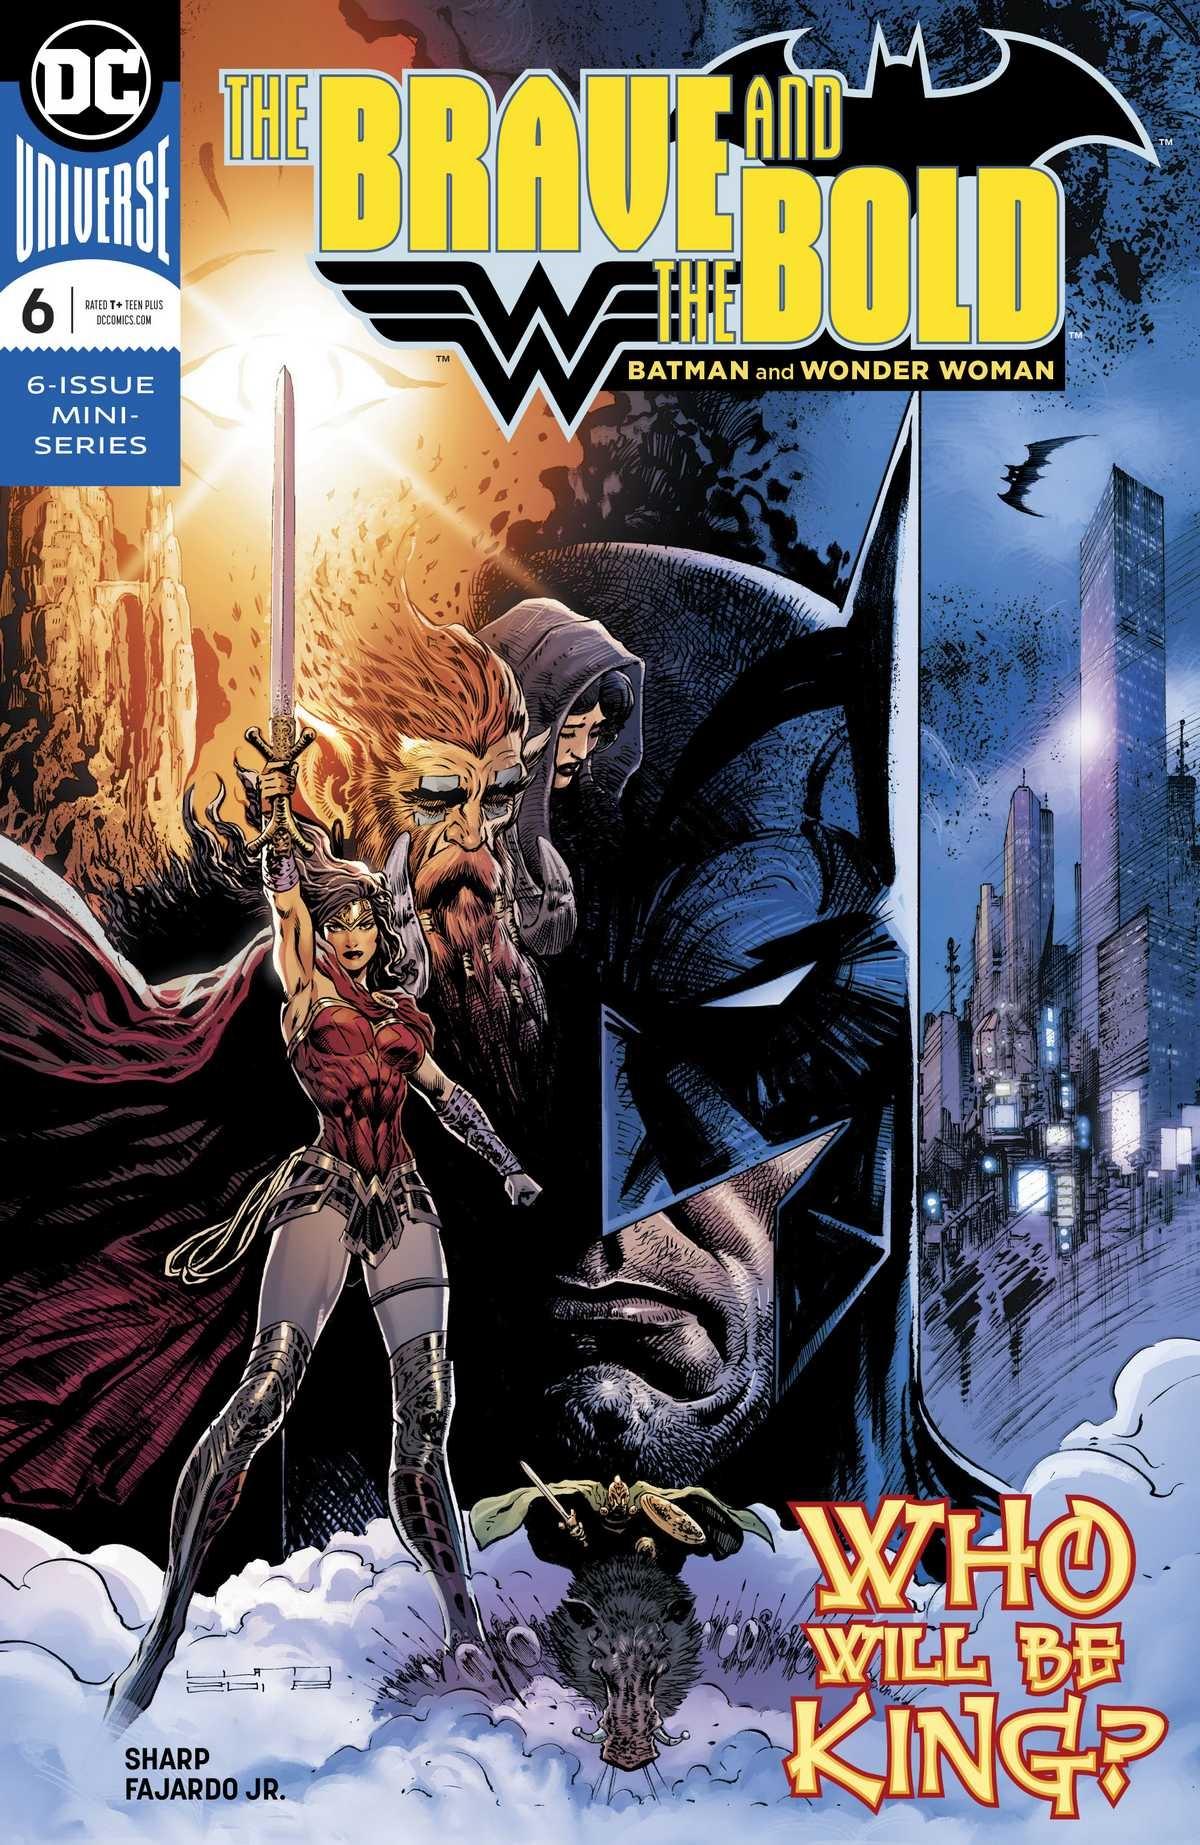 The Brave and the Bold: Batman and Wonder Woman Vol. 1 #6